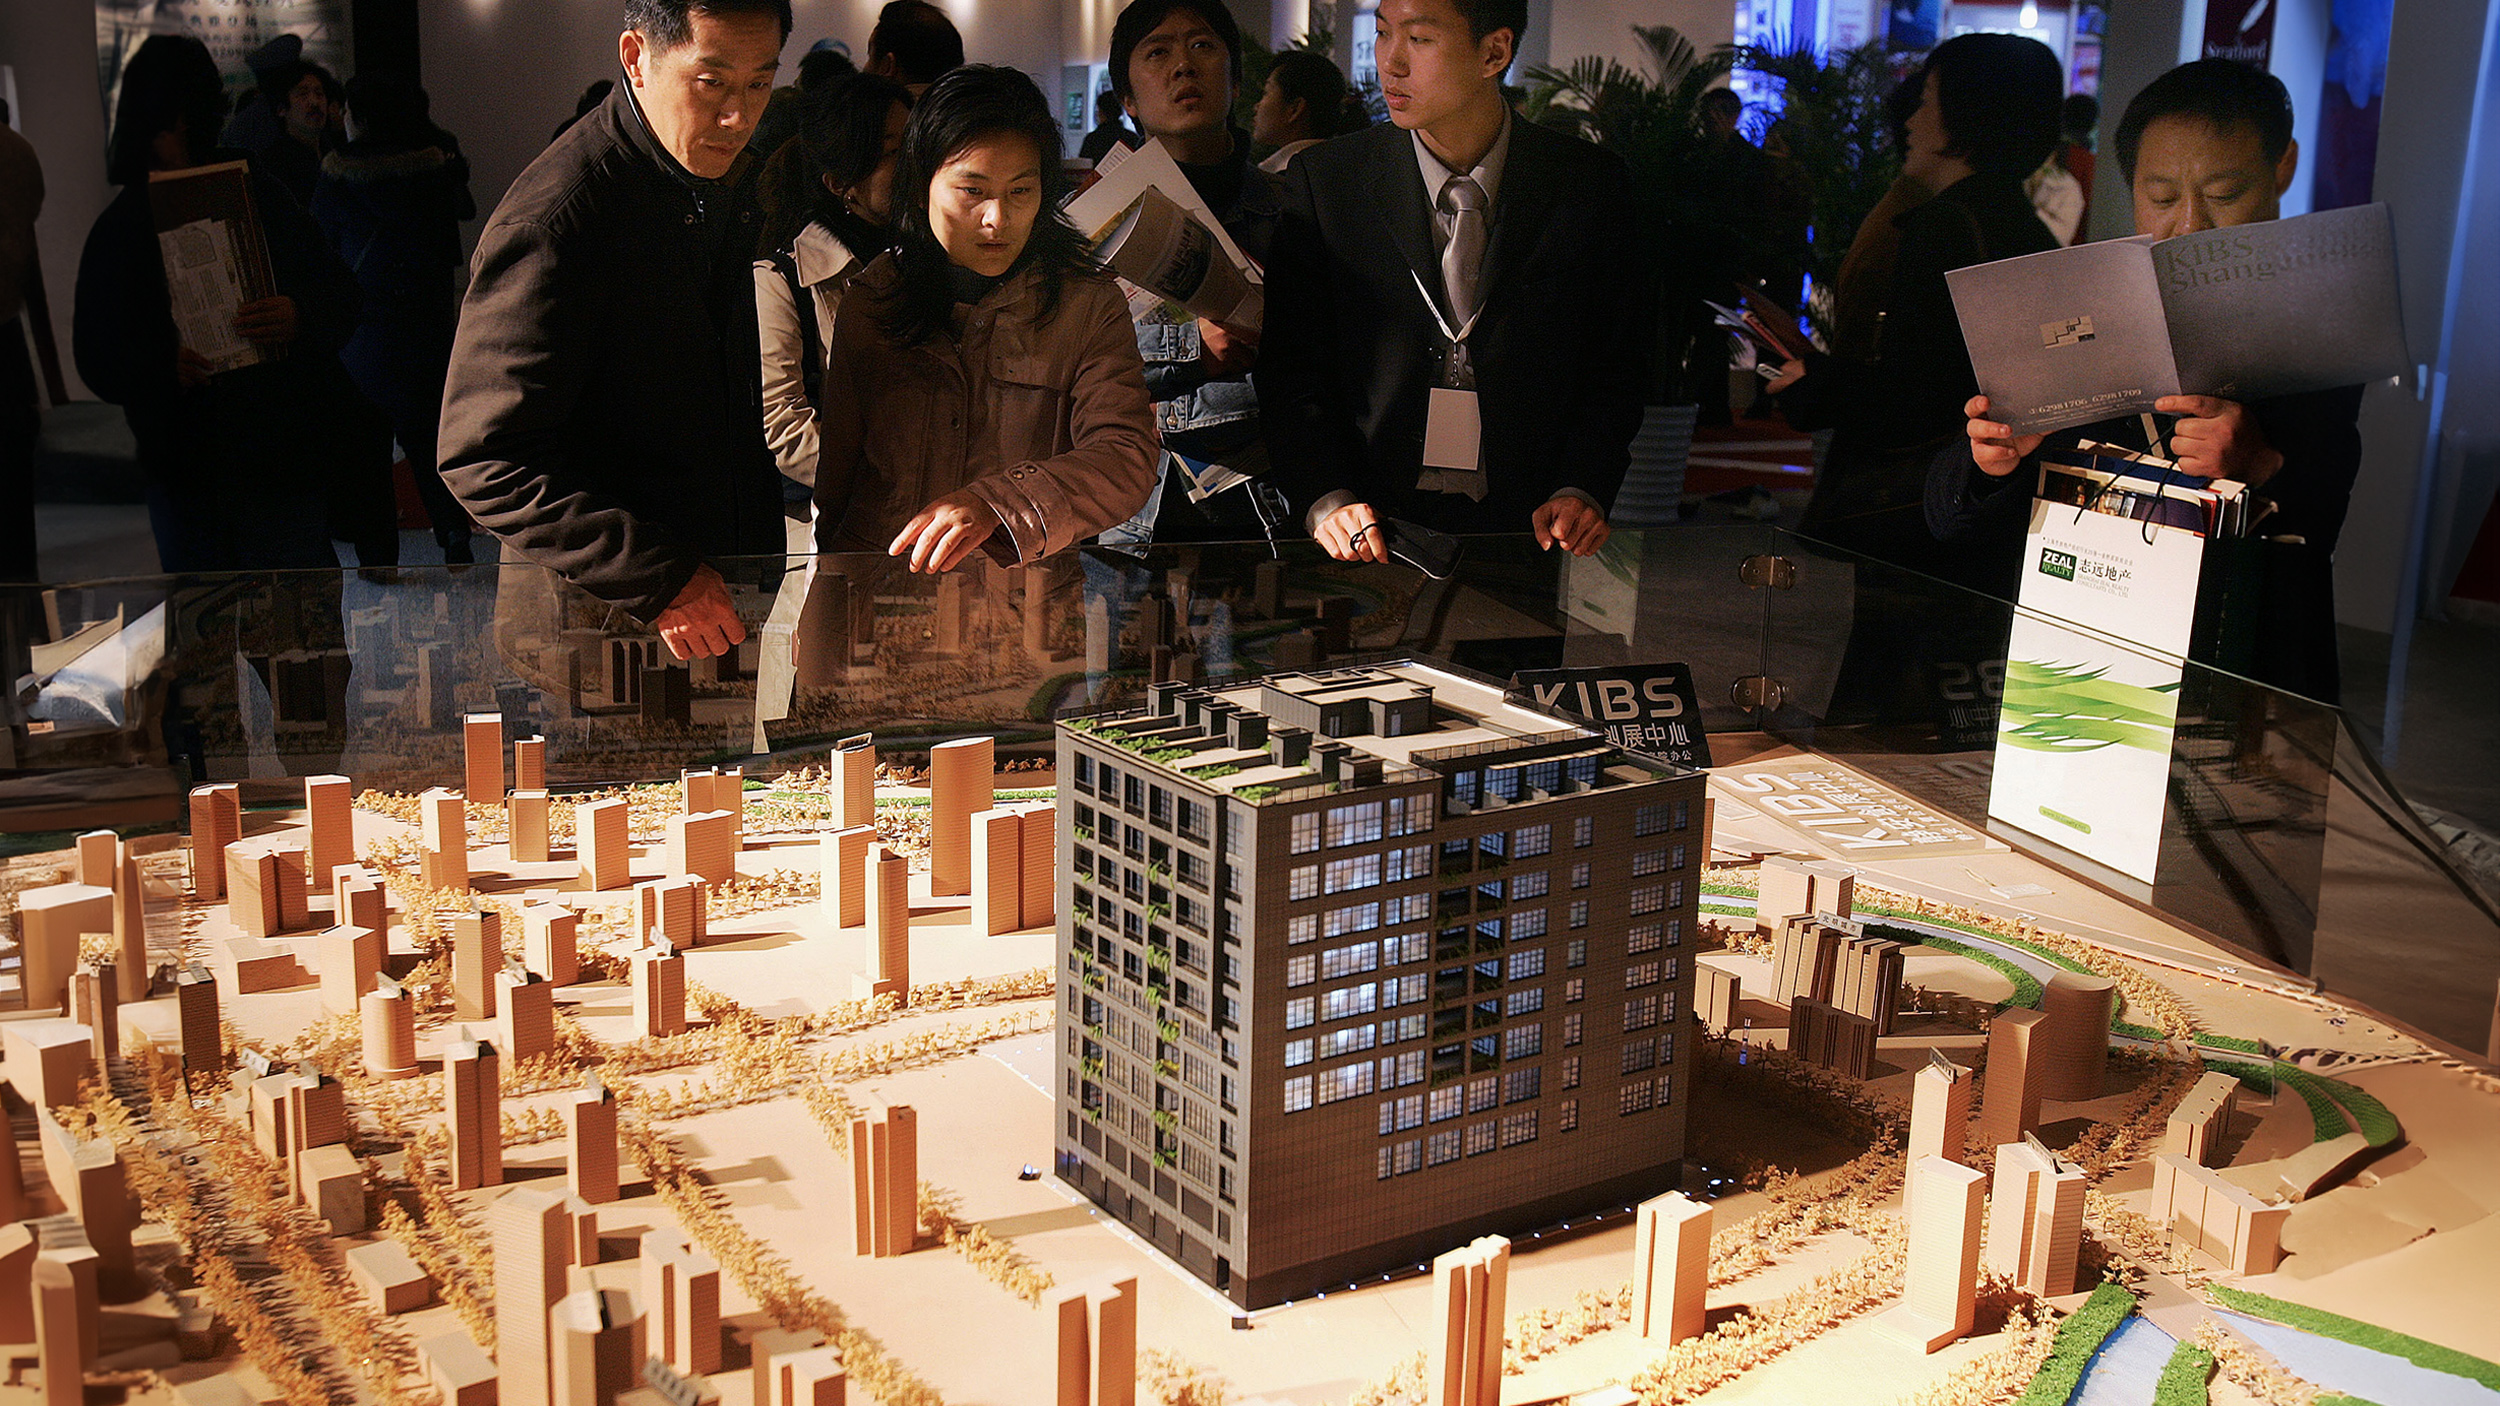 People examining a detailed architectural model of a building and its surrounding area at an exhibition, reflecting the impact of the Chinese economy on urban development.